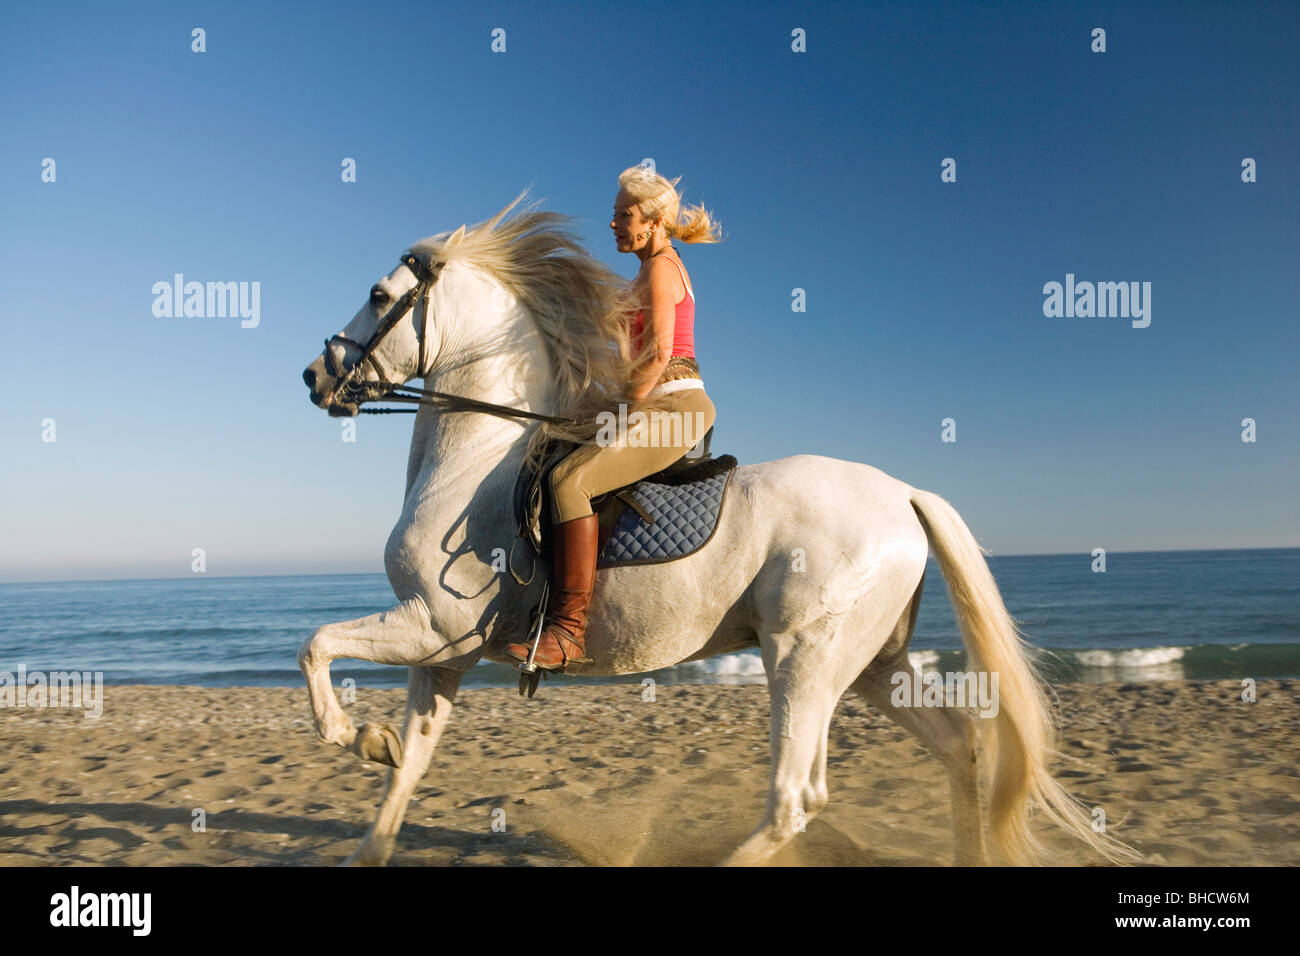 Woman riding horse on the beach Stock Photo